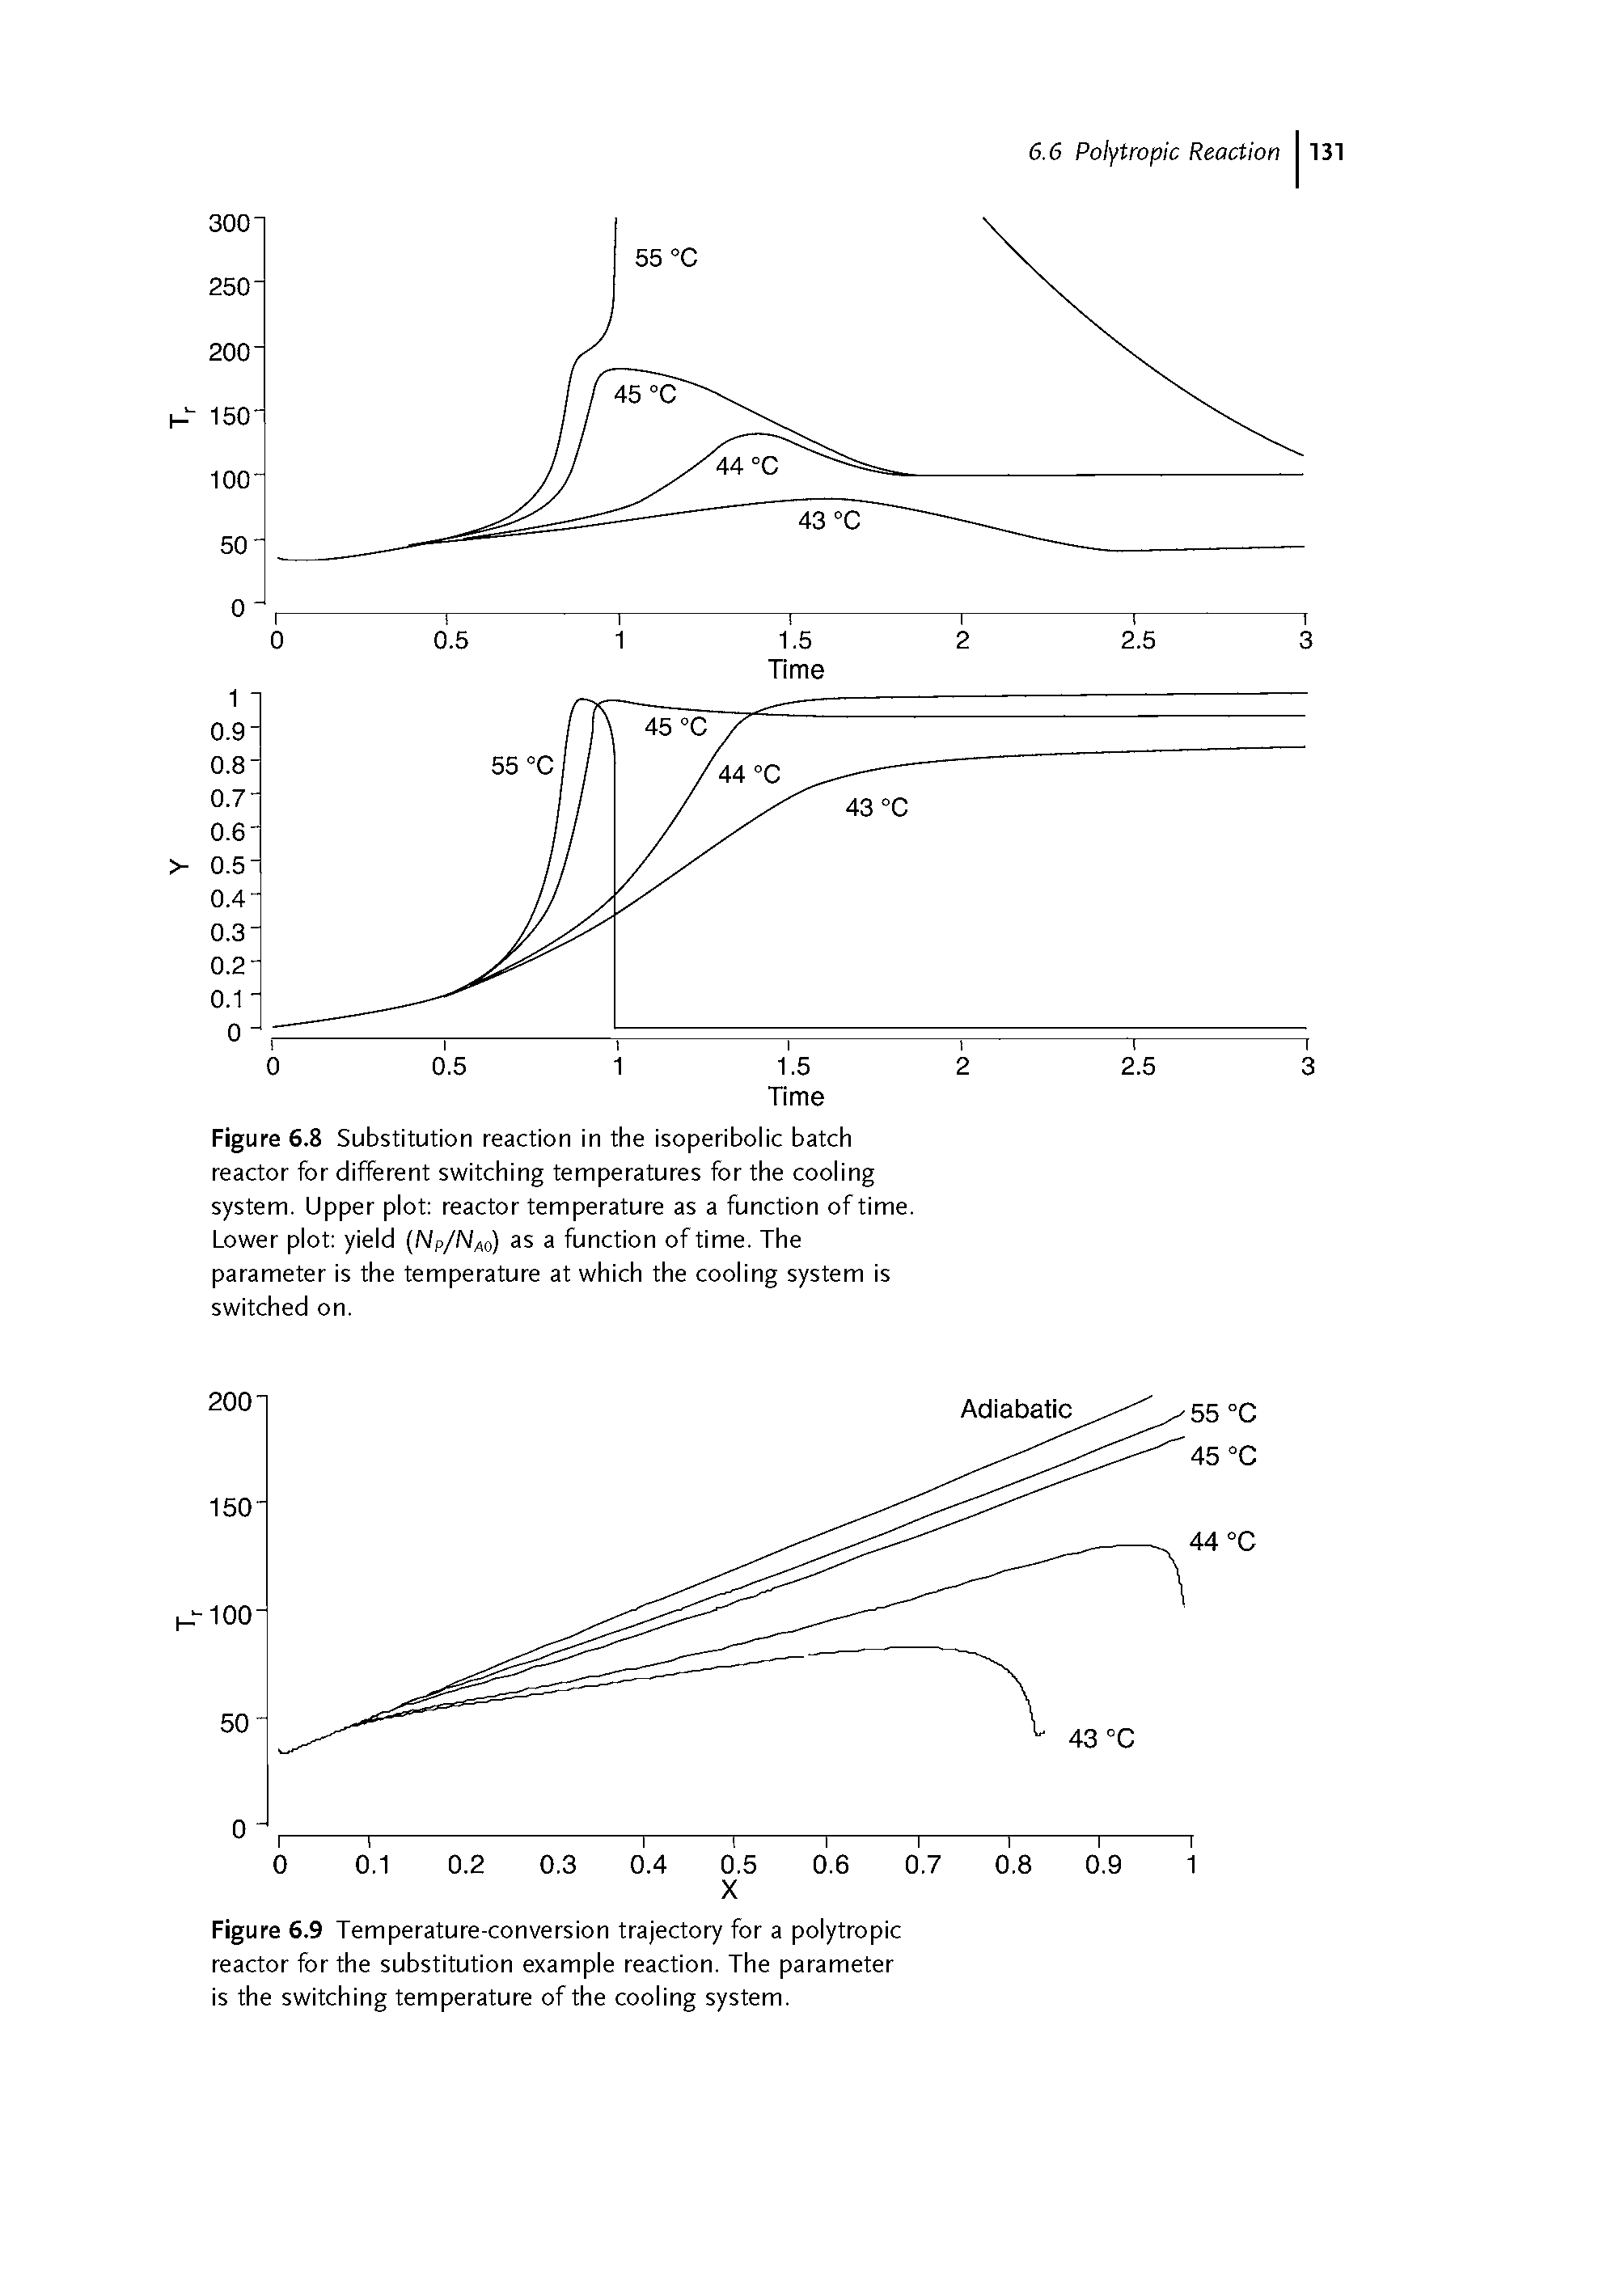 Figure 6.8 Substitution reaction in the isoperibolic batch reactor for different switching temperatures for the cooling system. Upper plot reactor temperature as a function of time. Lower plot yield (NP/NA0) as a function of time. The parameter is the temperature at which the cooling system is switched on.